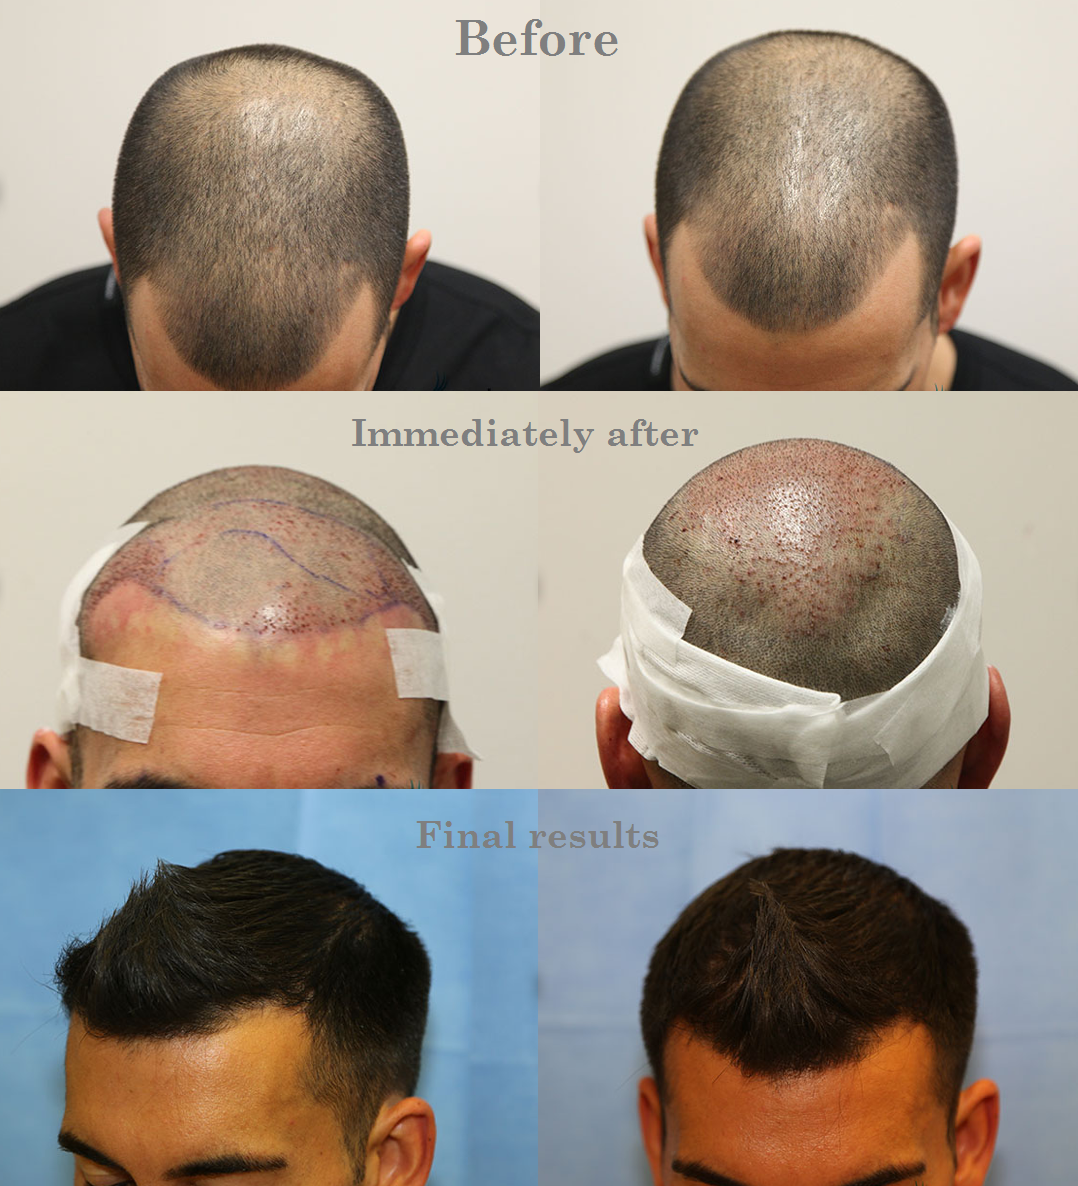 Are you suitable for a Hair Transplant?